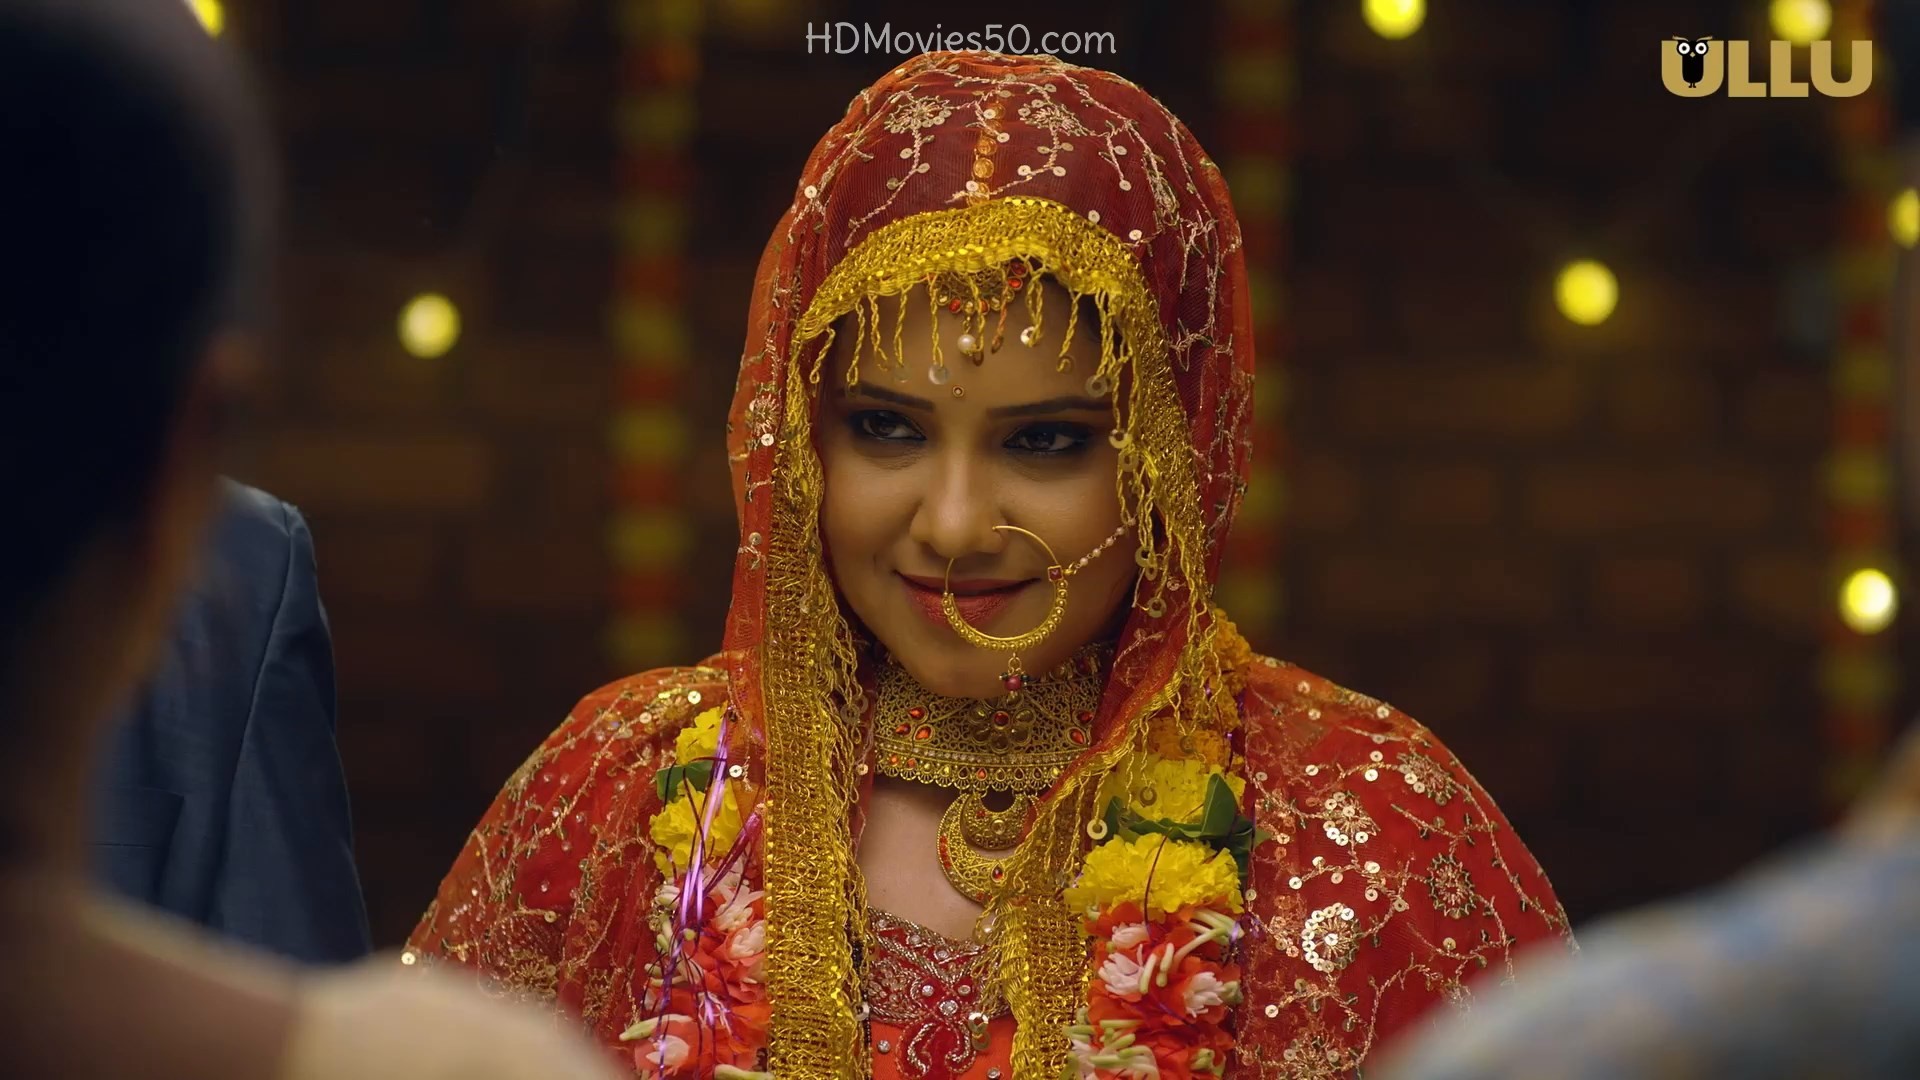 Shahad Part 1 Torrent Kickass in HD quality 1080p and 720p 2022 Movie | kat | tpb Screen Shot 1